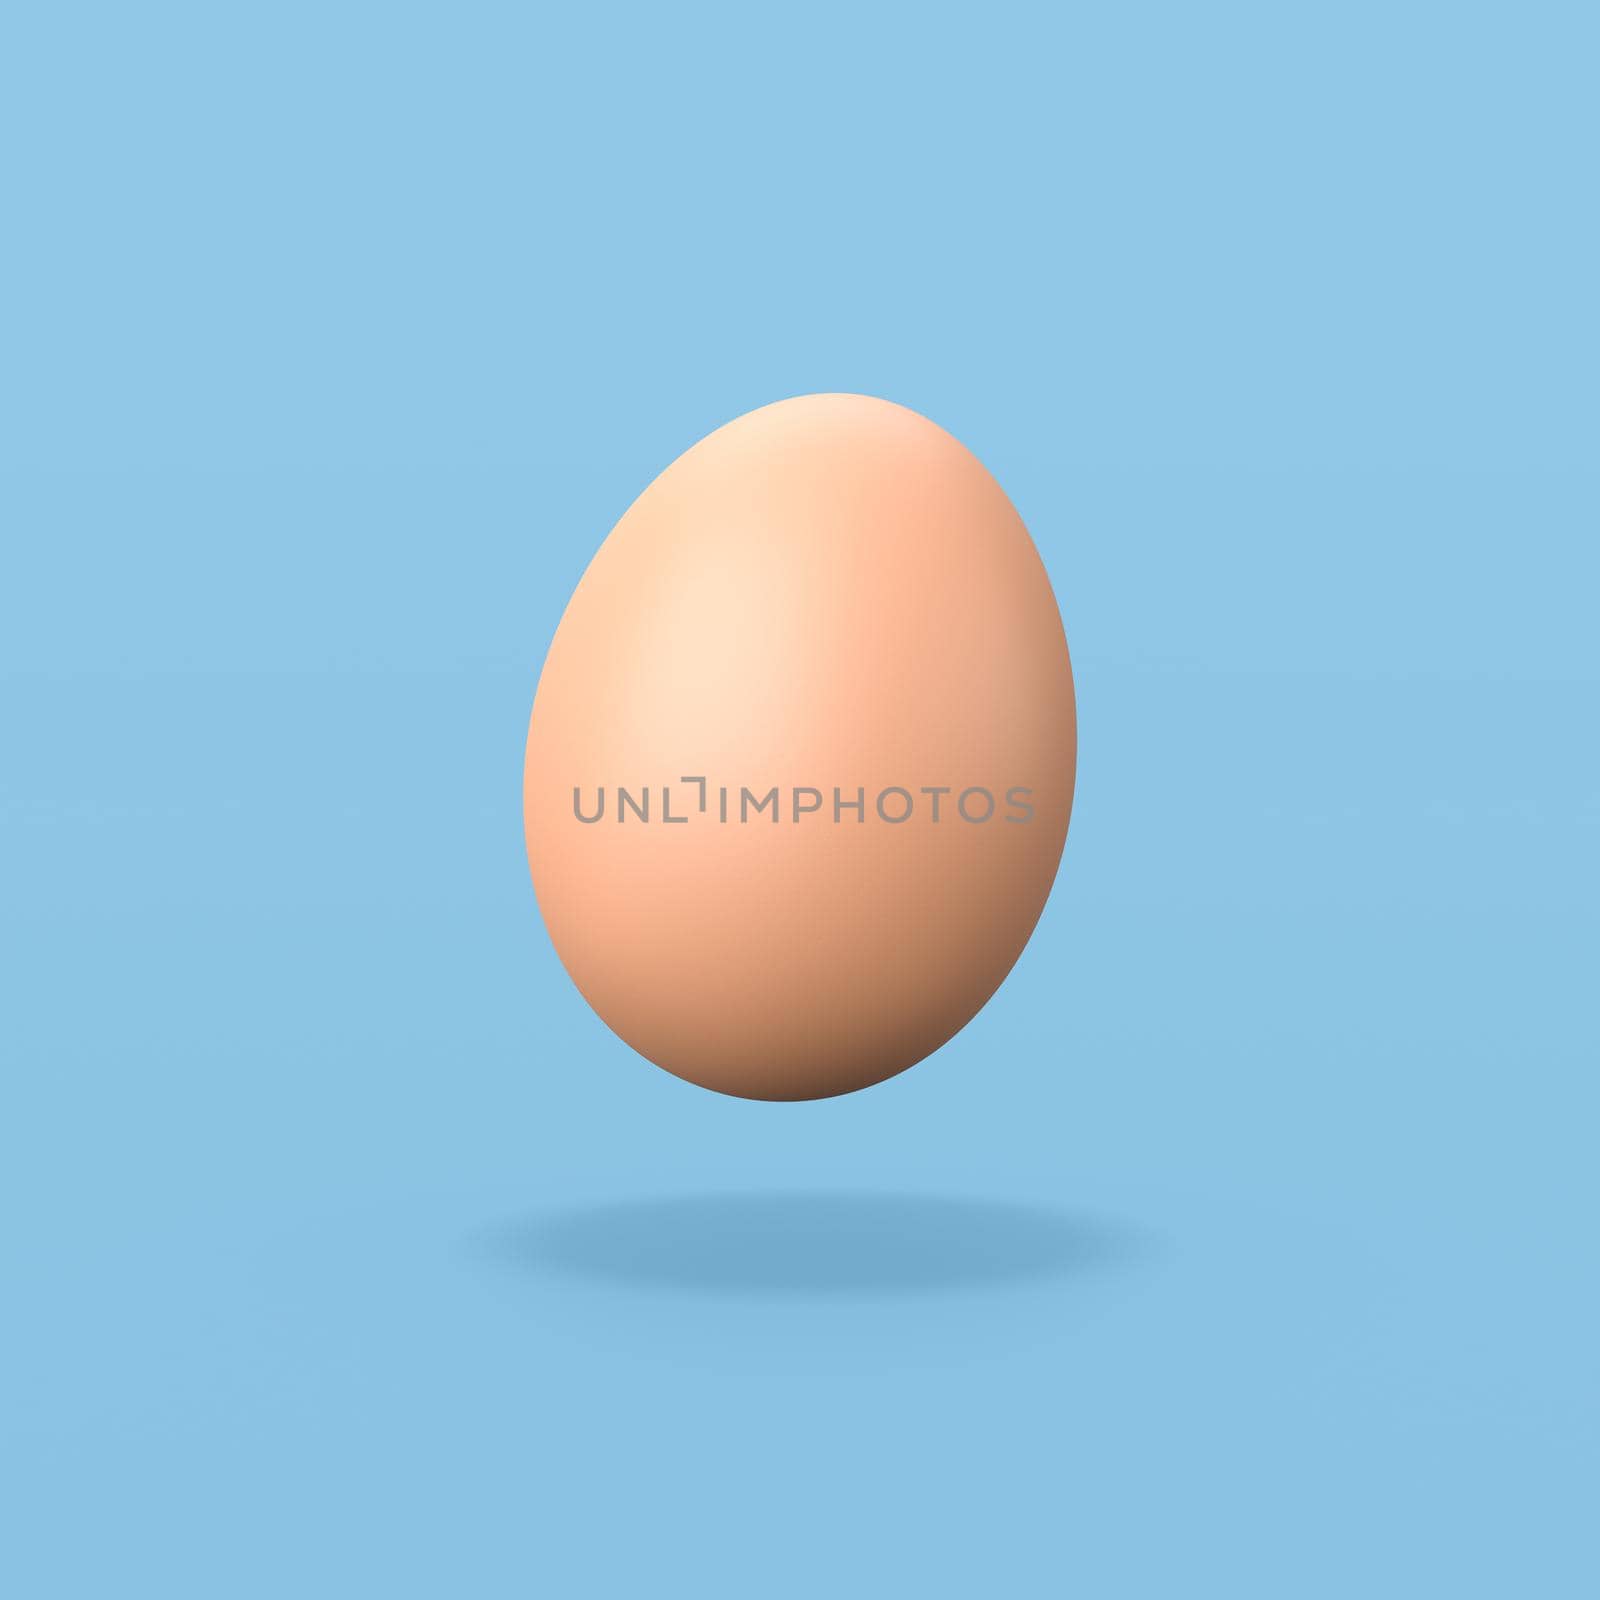 One Hen's Egg on Flat Blue Background with Shadow 3D Illustration